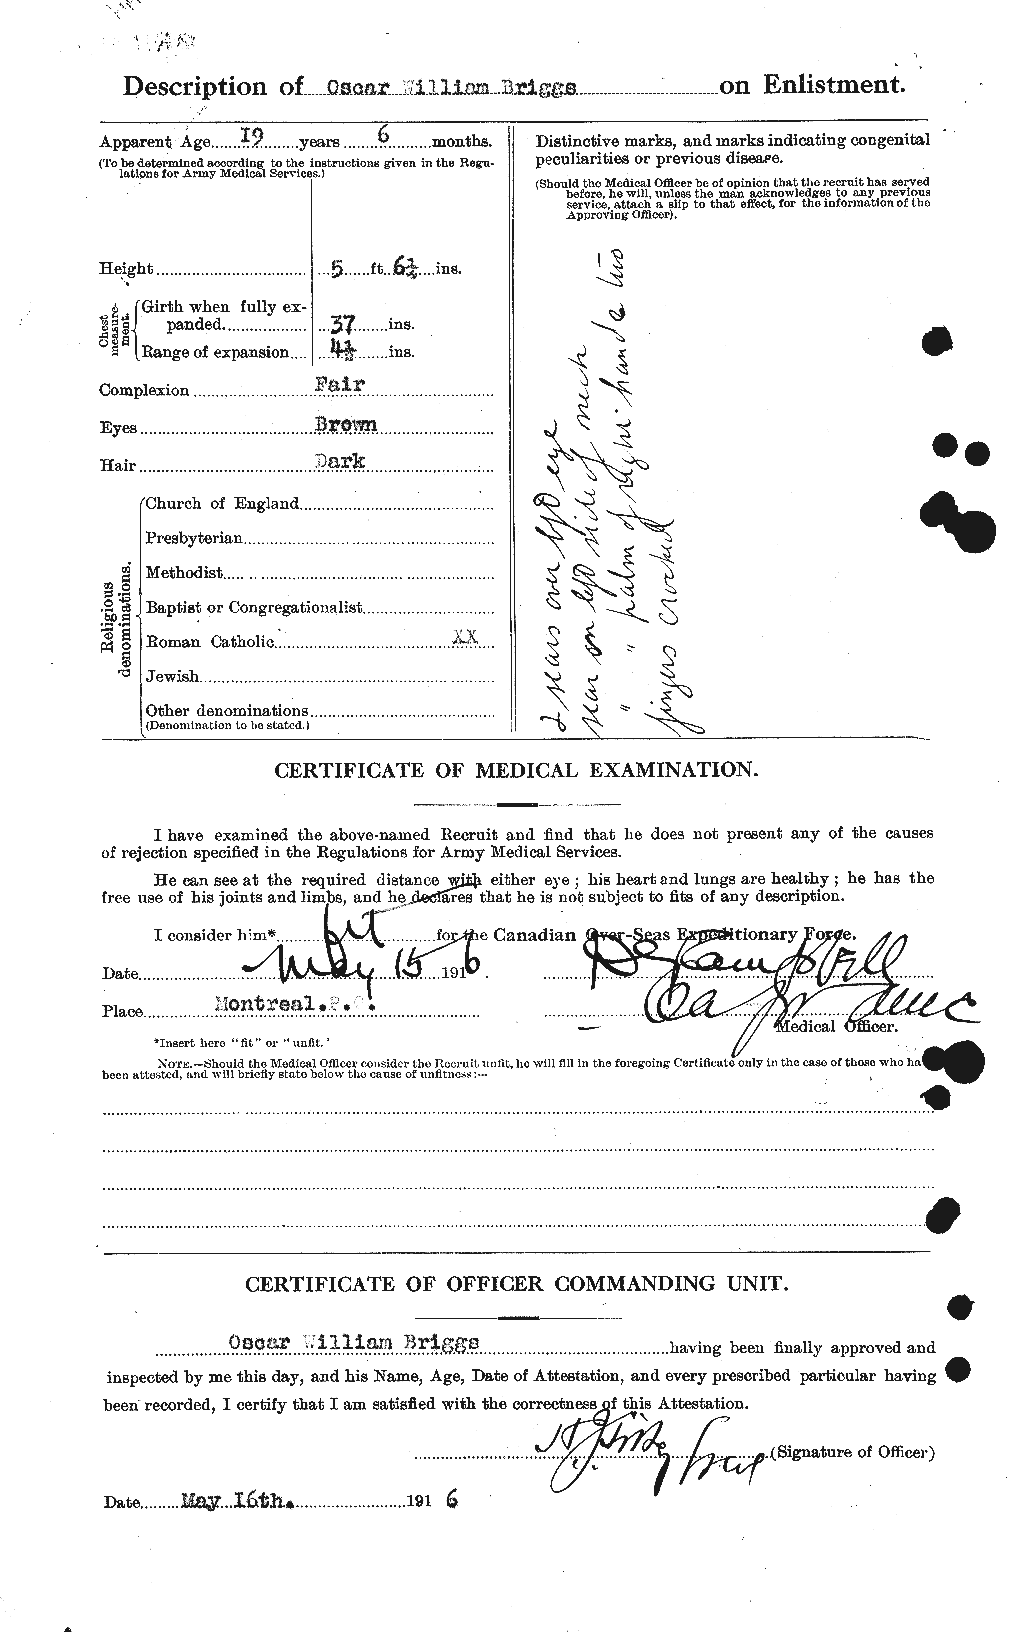 Personnel Records of the First World War - CEF 264080b